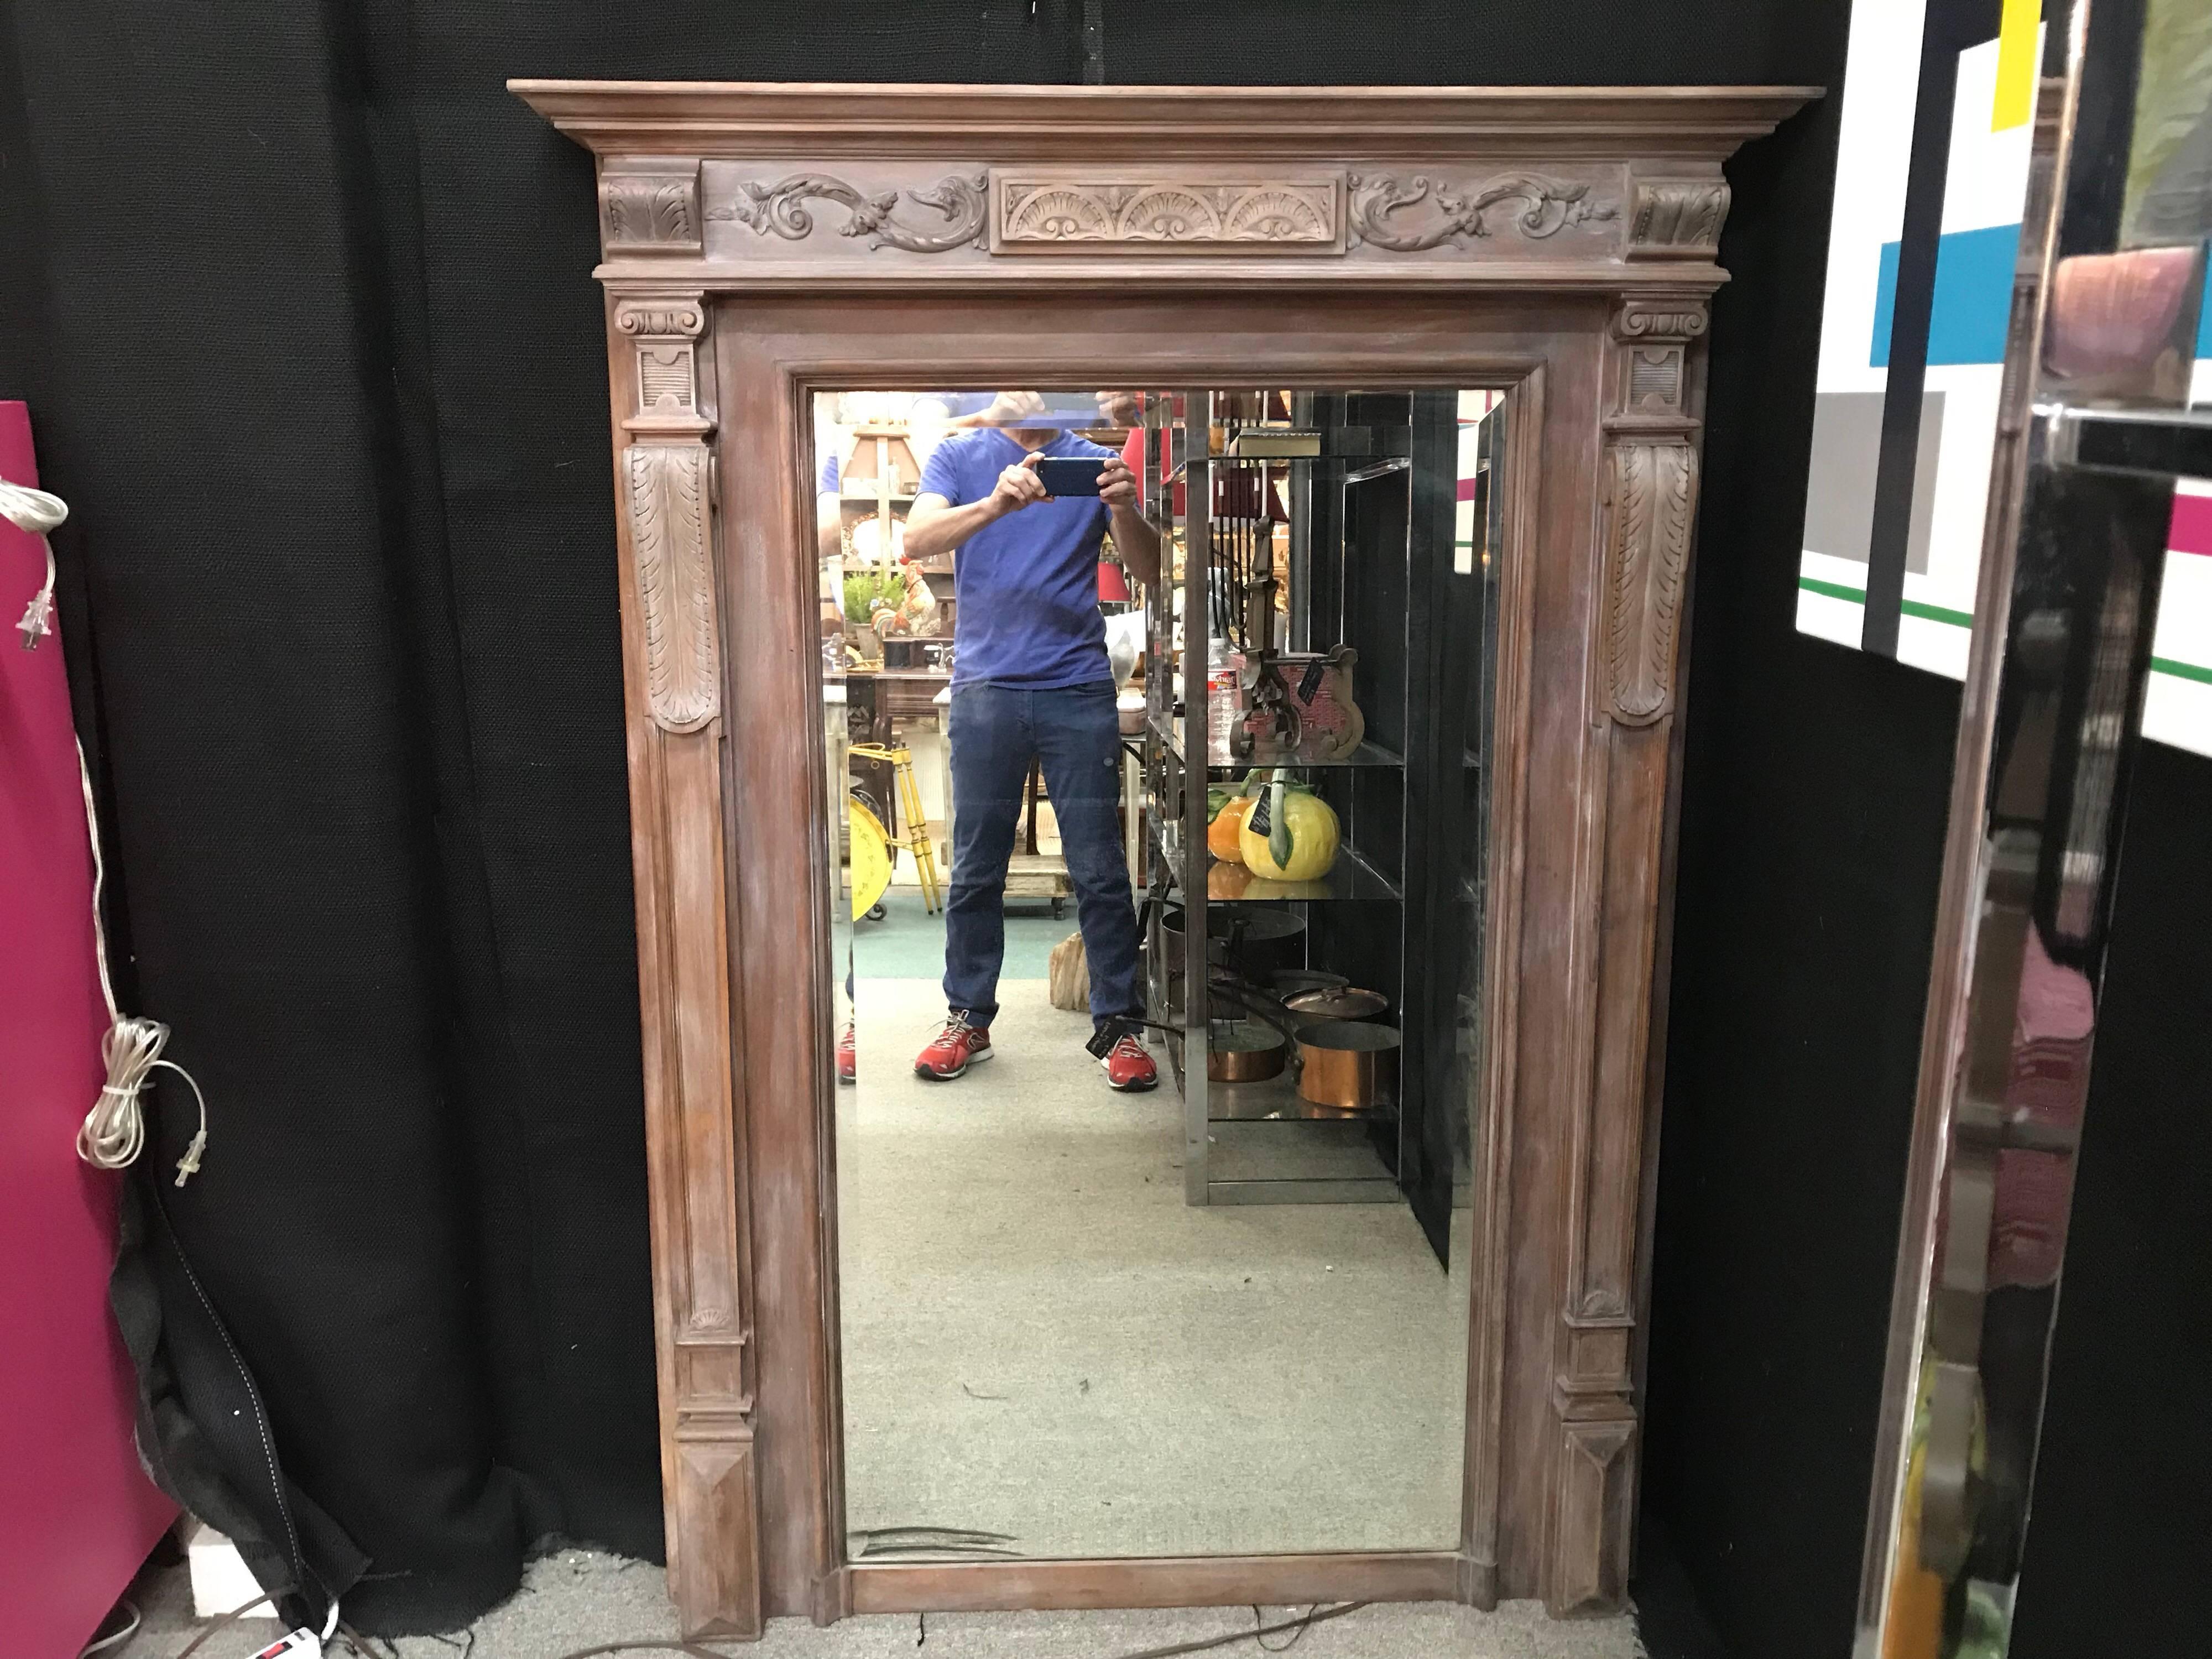 19th century, French limed wood Neoclassical style beveled mirror.
Stunning 19th century French limed wood or cerused wood full length Neoclassical style beveled mirror.
This versatile antique French mirror would work well above a fireplace,